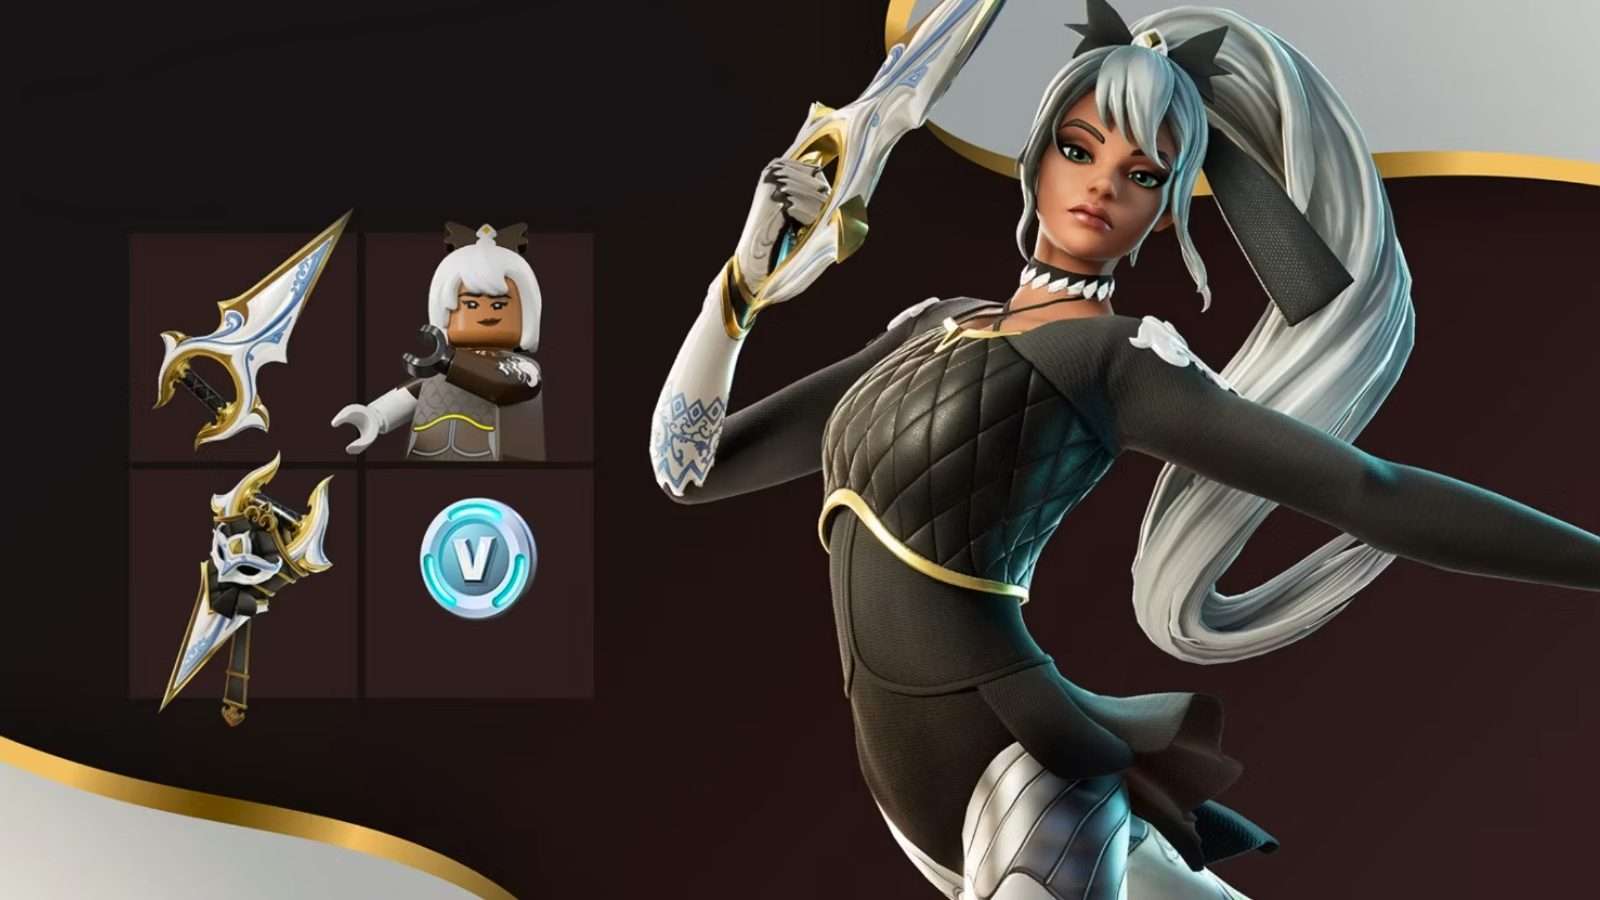 Fortnite Perfect Execution Starter Pack and Clara skin.